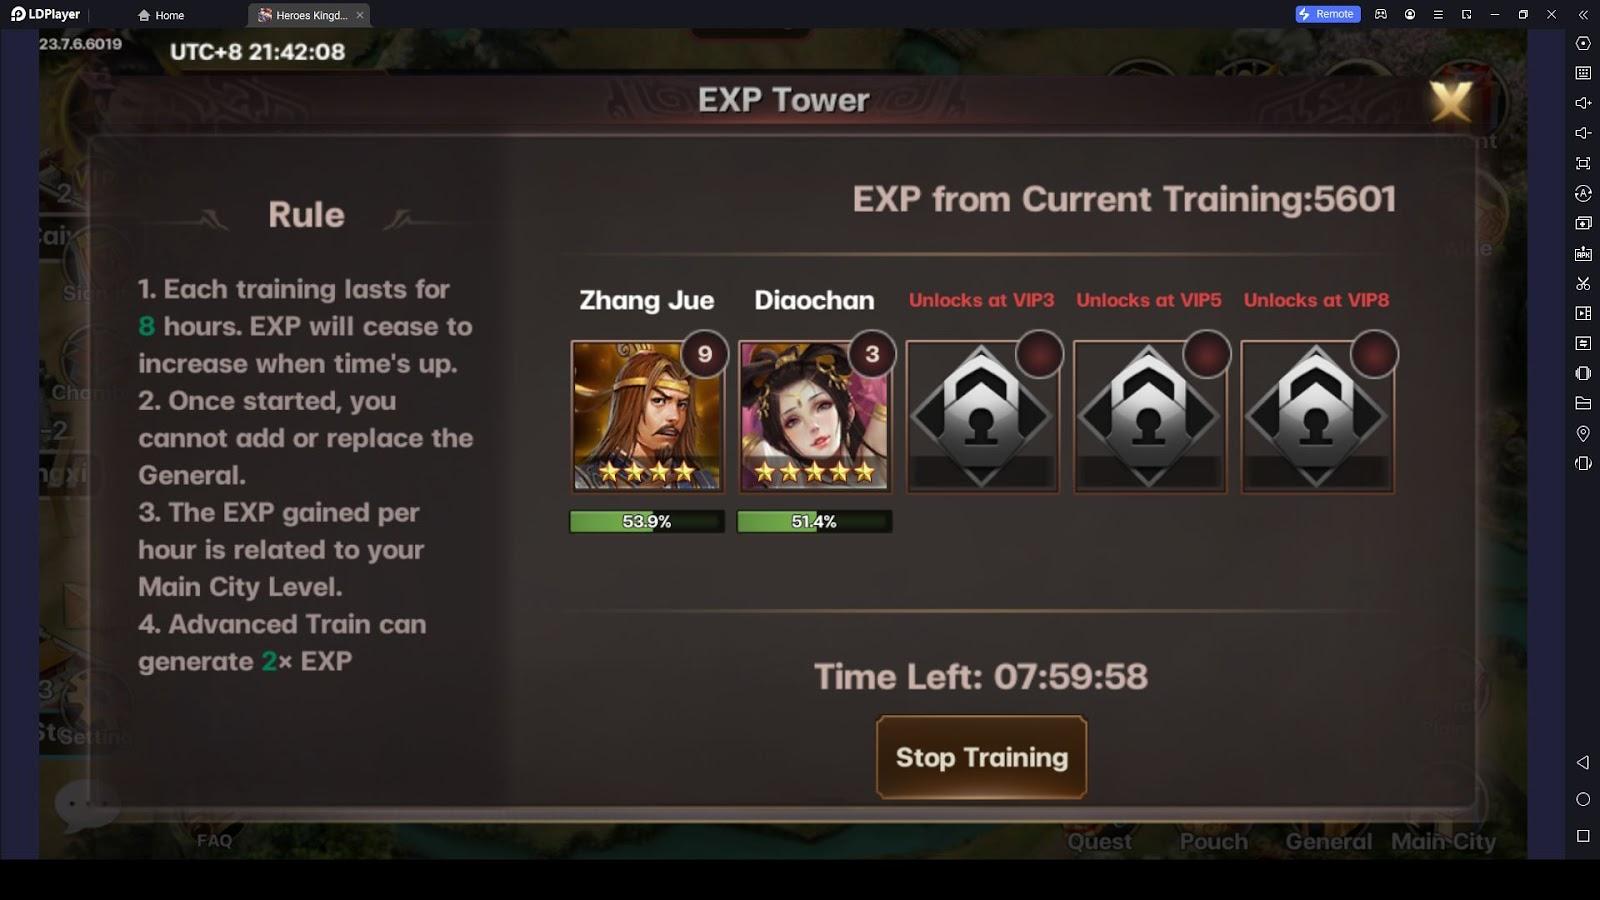 Send Your Generals to the EXP Tower